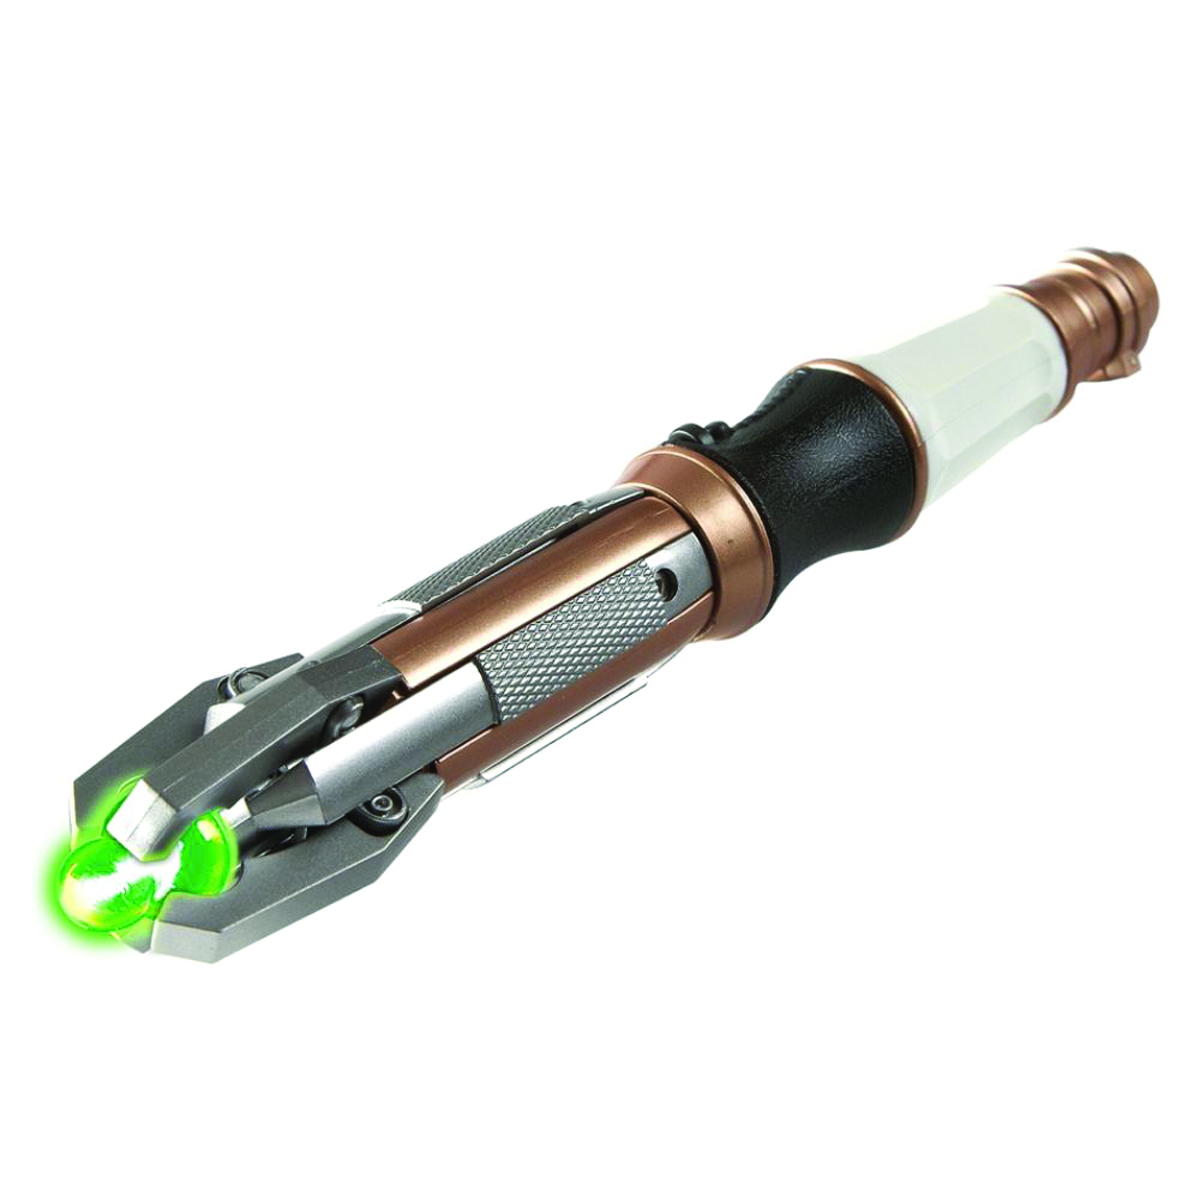 AUG189159 - DOCTOR WHO 13TH DOCTOR SONIC SCREWDRIVER - Previews World